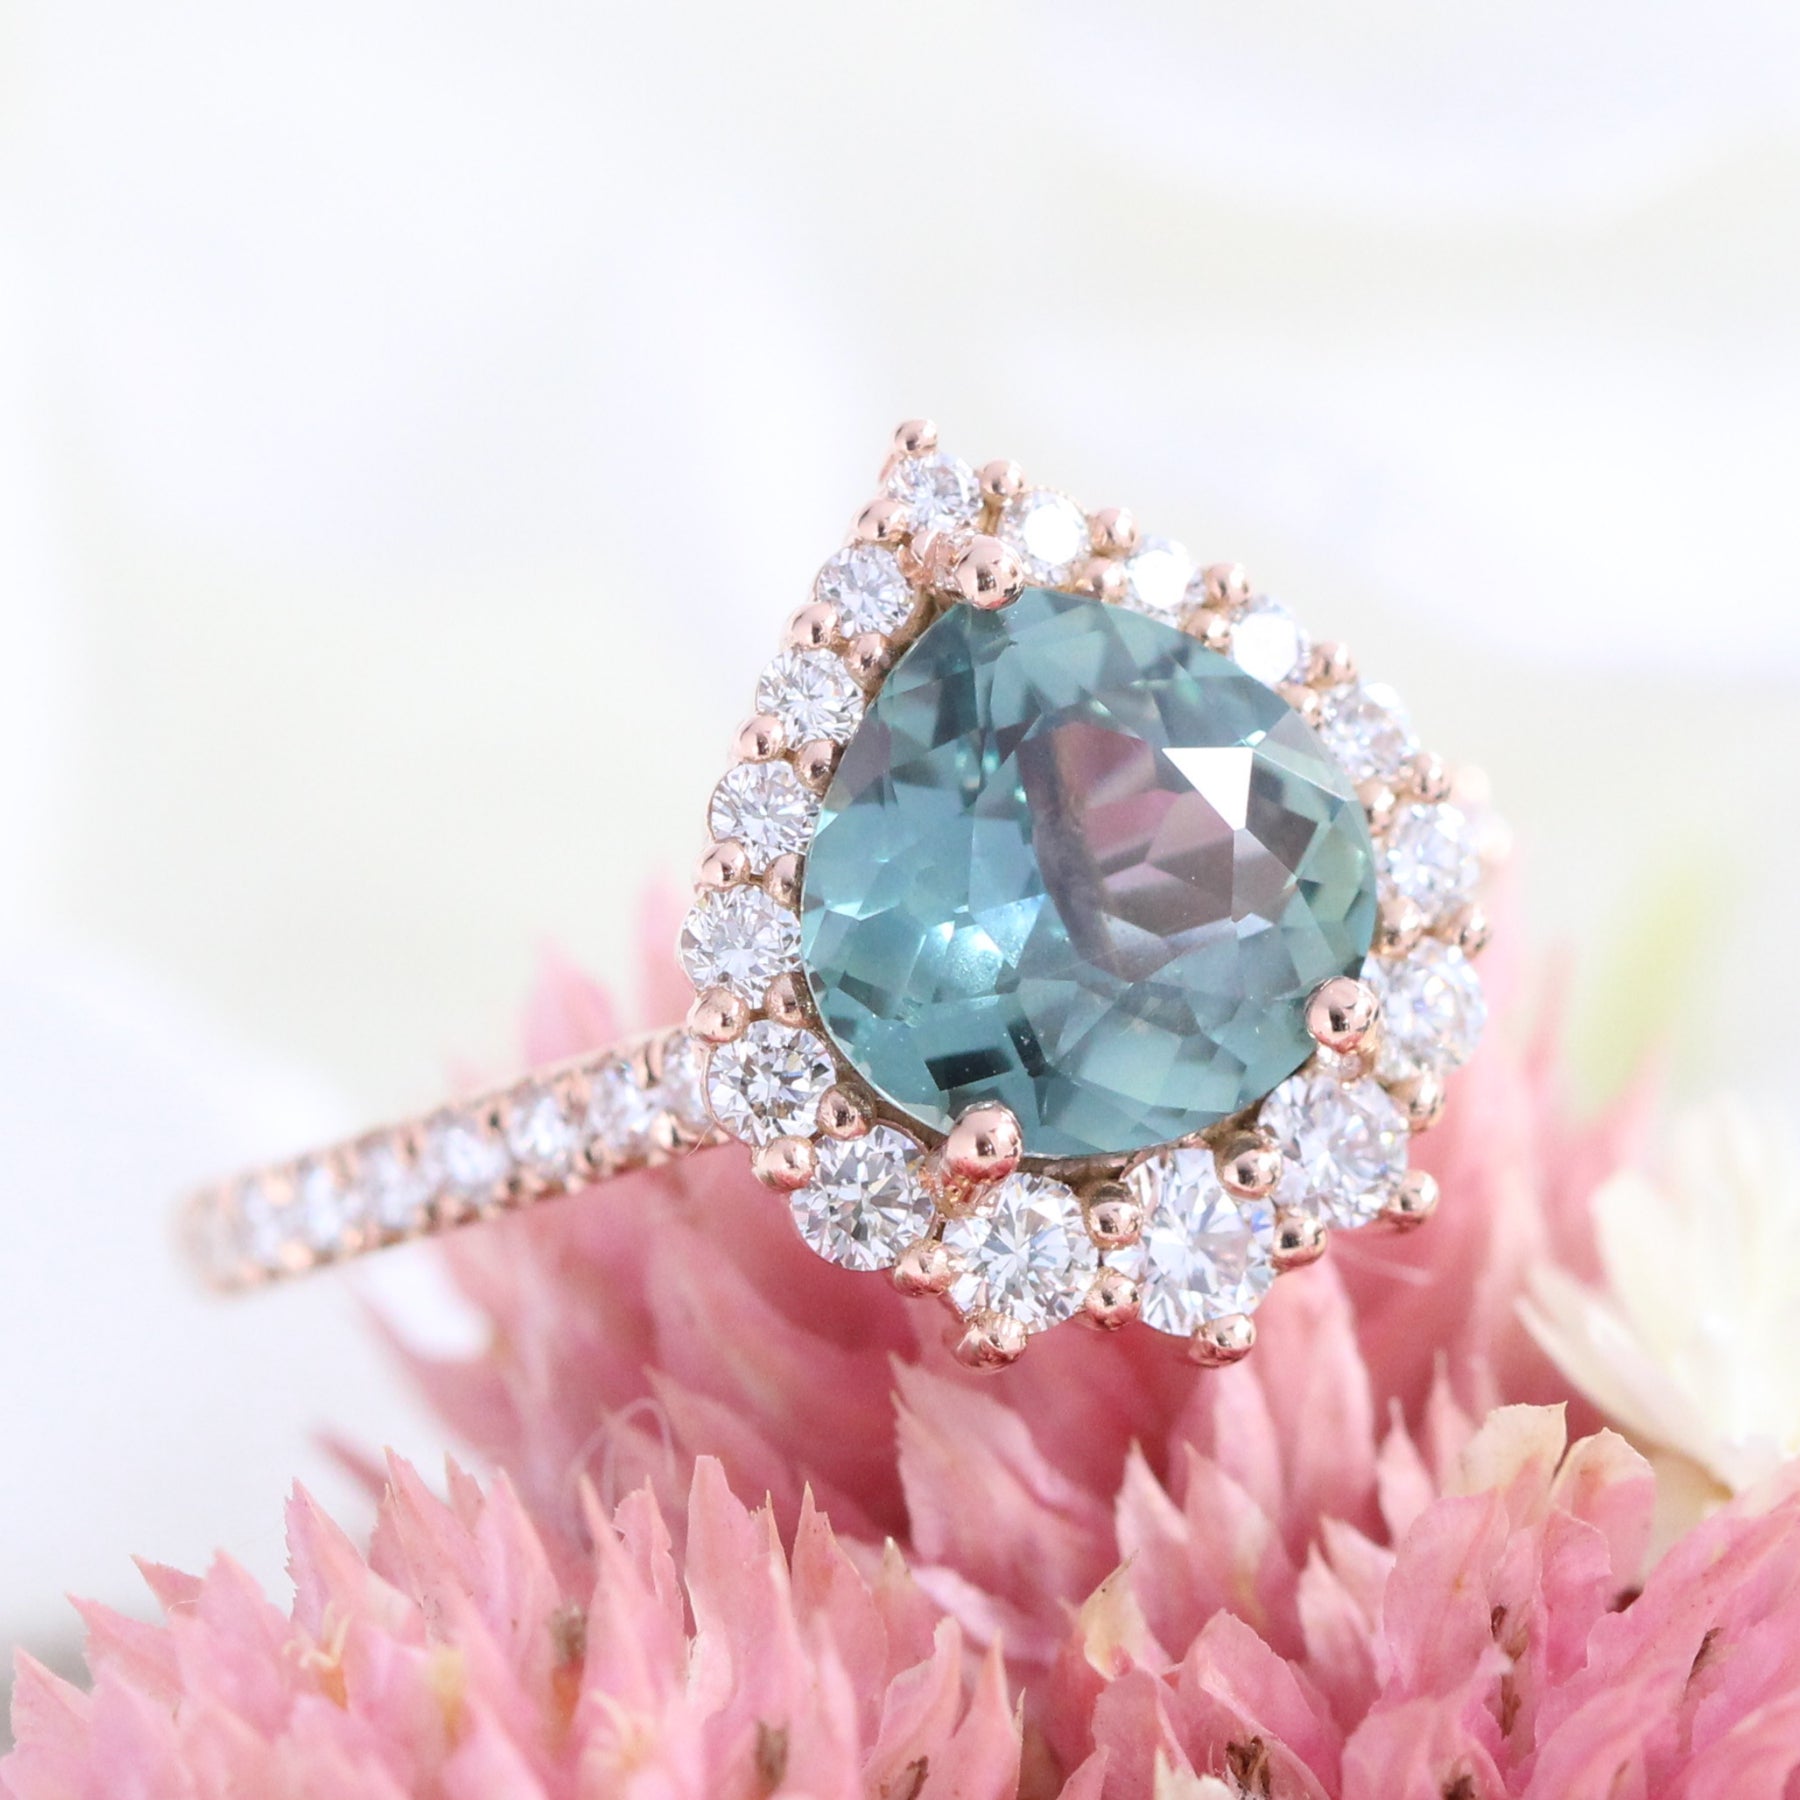 Pear Teal green sapphire engagement ring rose gold halo diamond ring la more design jewelry